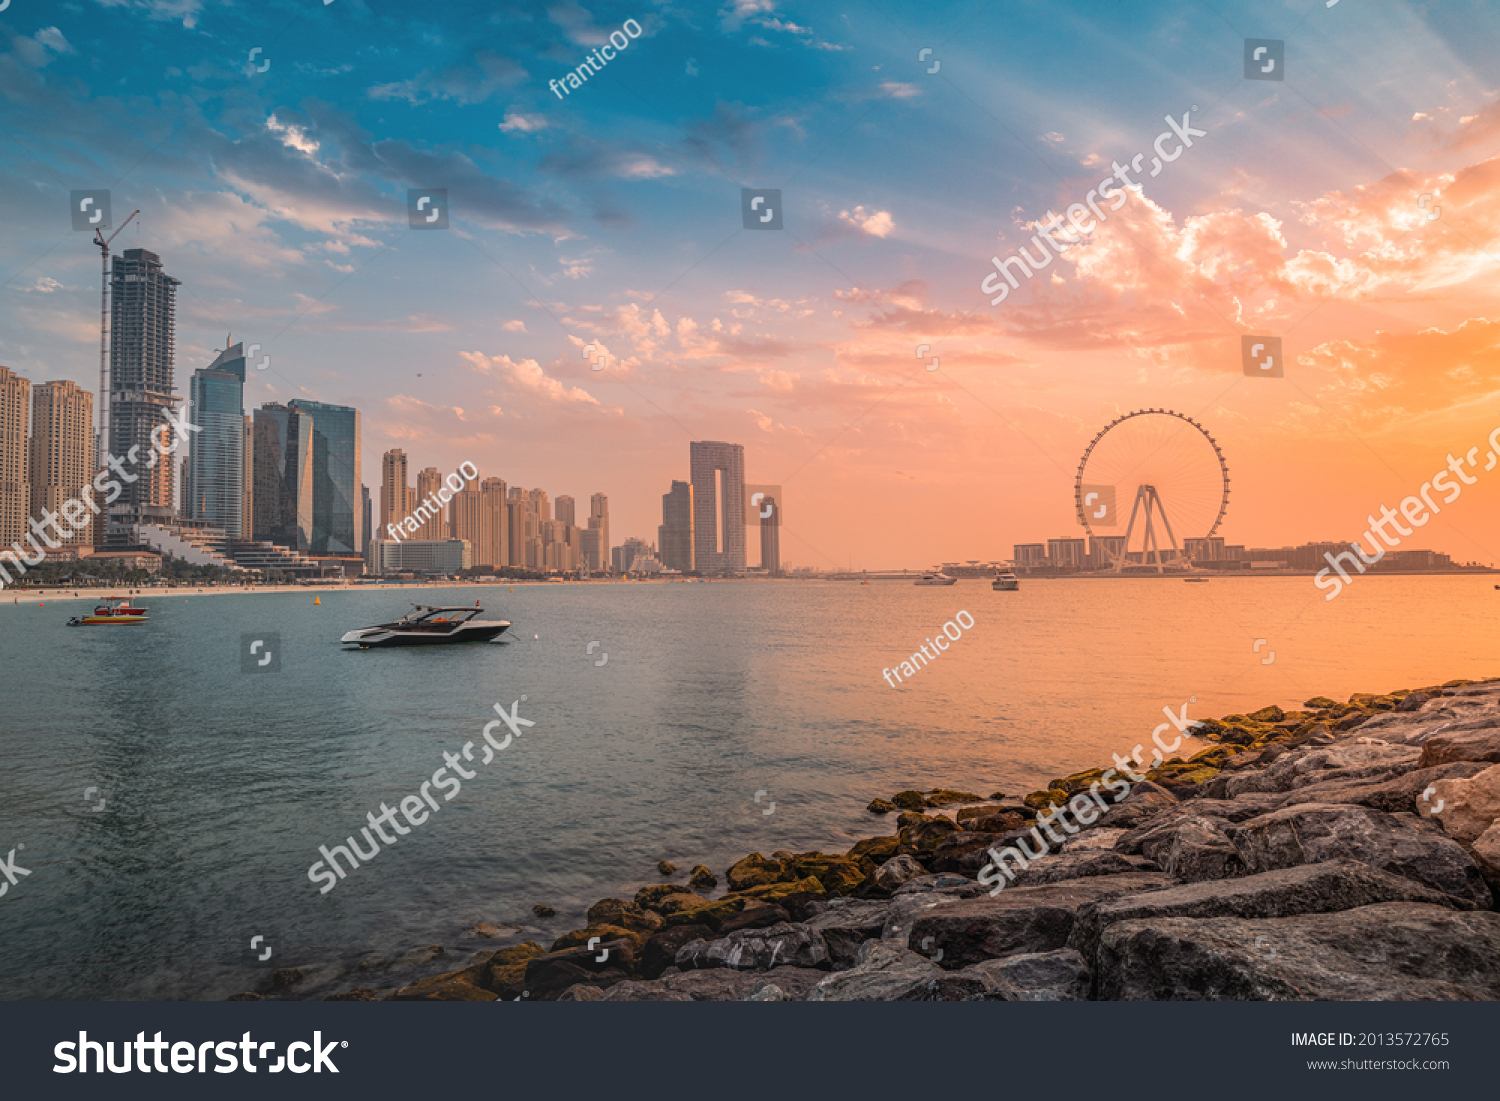 A delightful and colorful sunset over Blue waters Island with the famous Dubai Eye Ferris wheel. Panoramic view of the city in UAE #2013572765